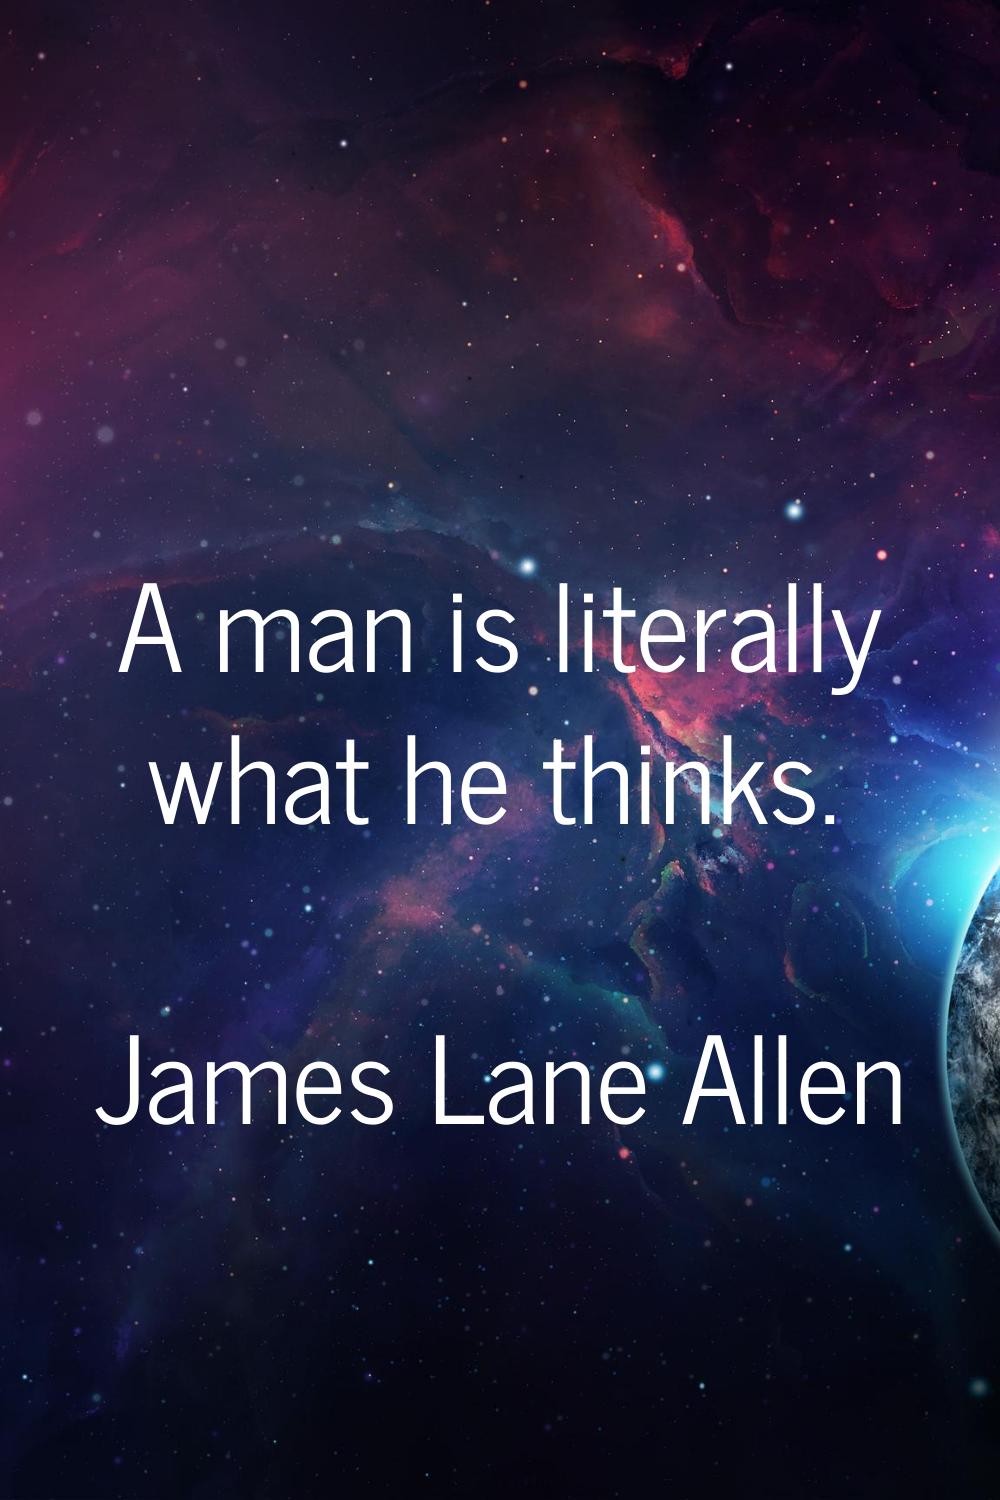 A man is literally what he thinks.